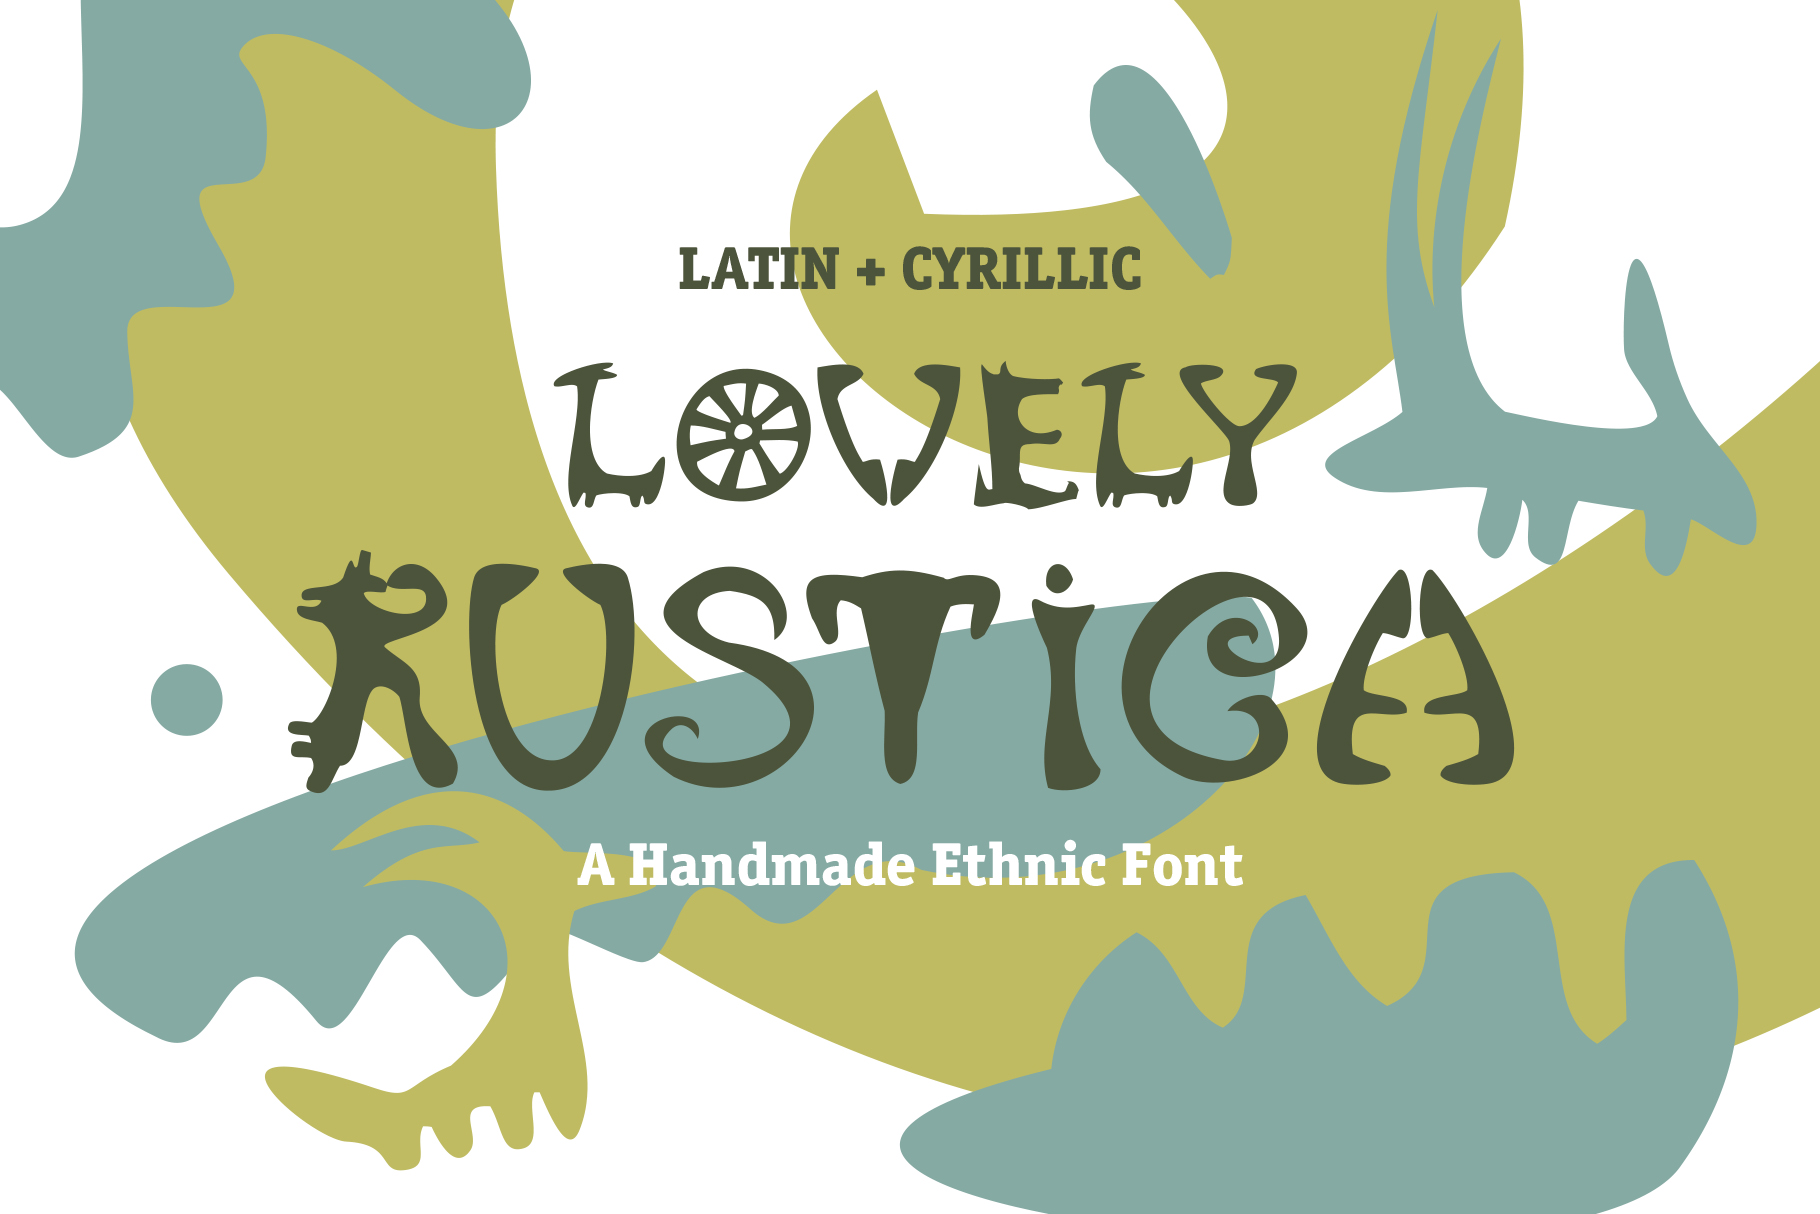 Lovely Rustica hand-lettered uppercase ethnic font - cover image.